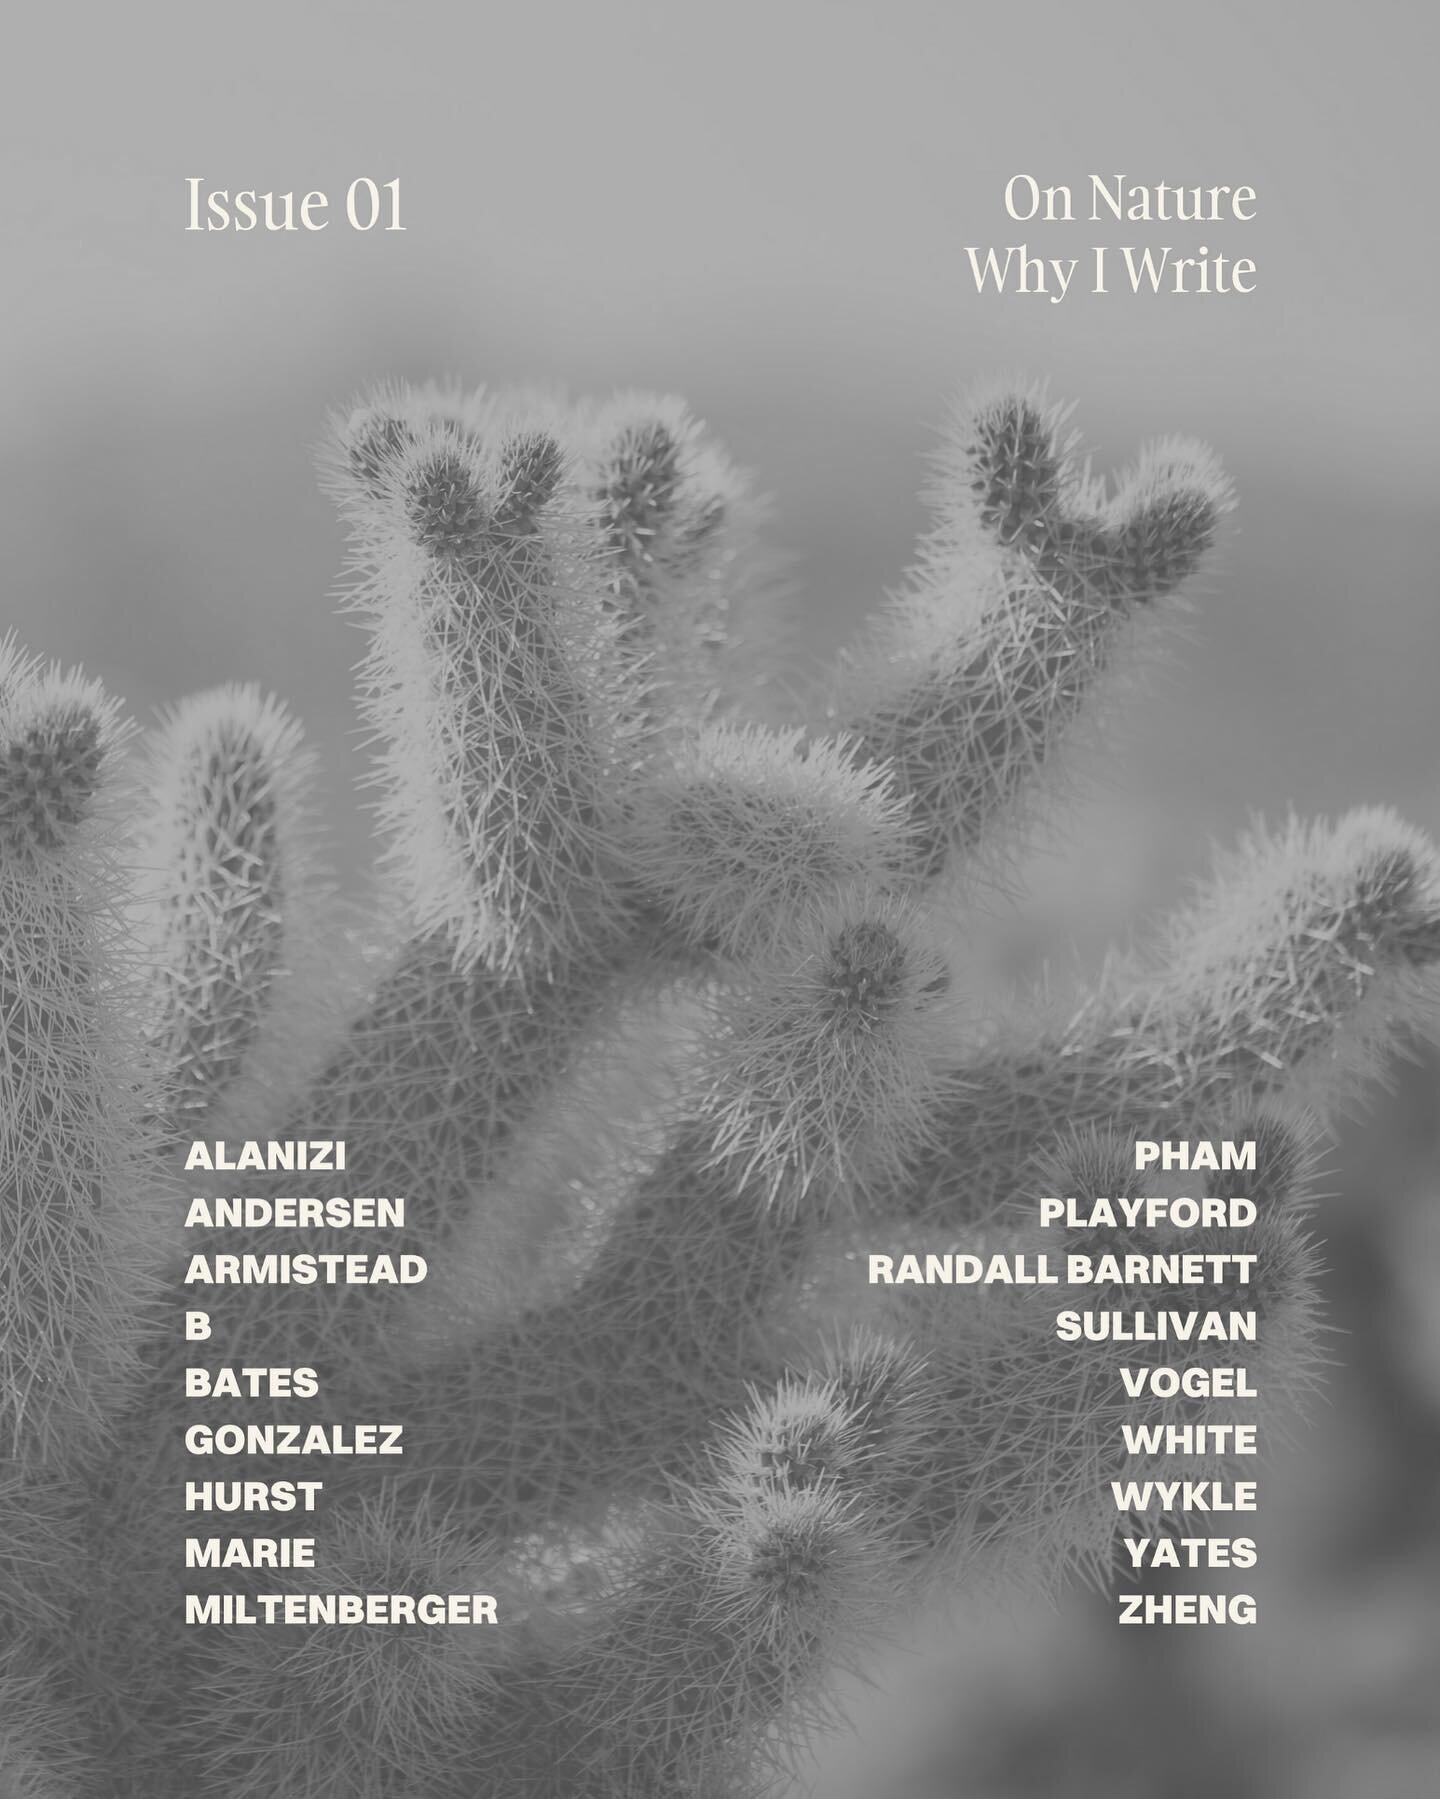 ✨ TODAY IS THE DAY! ✨ SOLSTICE MAGAZINE LAUNCH DAY!

Incredibly proud to debut our first issue. Link in story to snag your copy! (Or just head to our website)

📖 Both digital &amp; paperback formats available.

💥 Congrats to our 18 inaugural contri